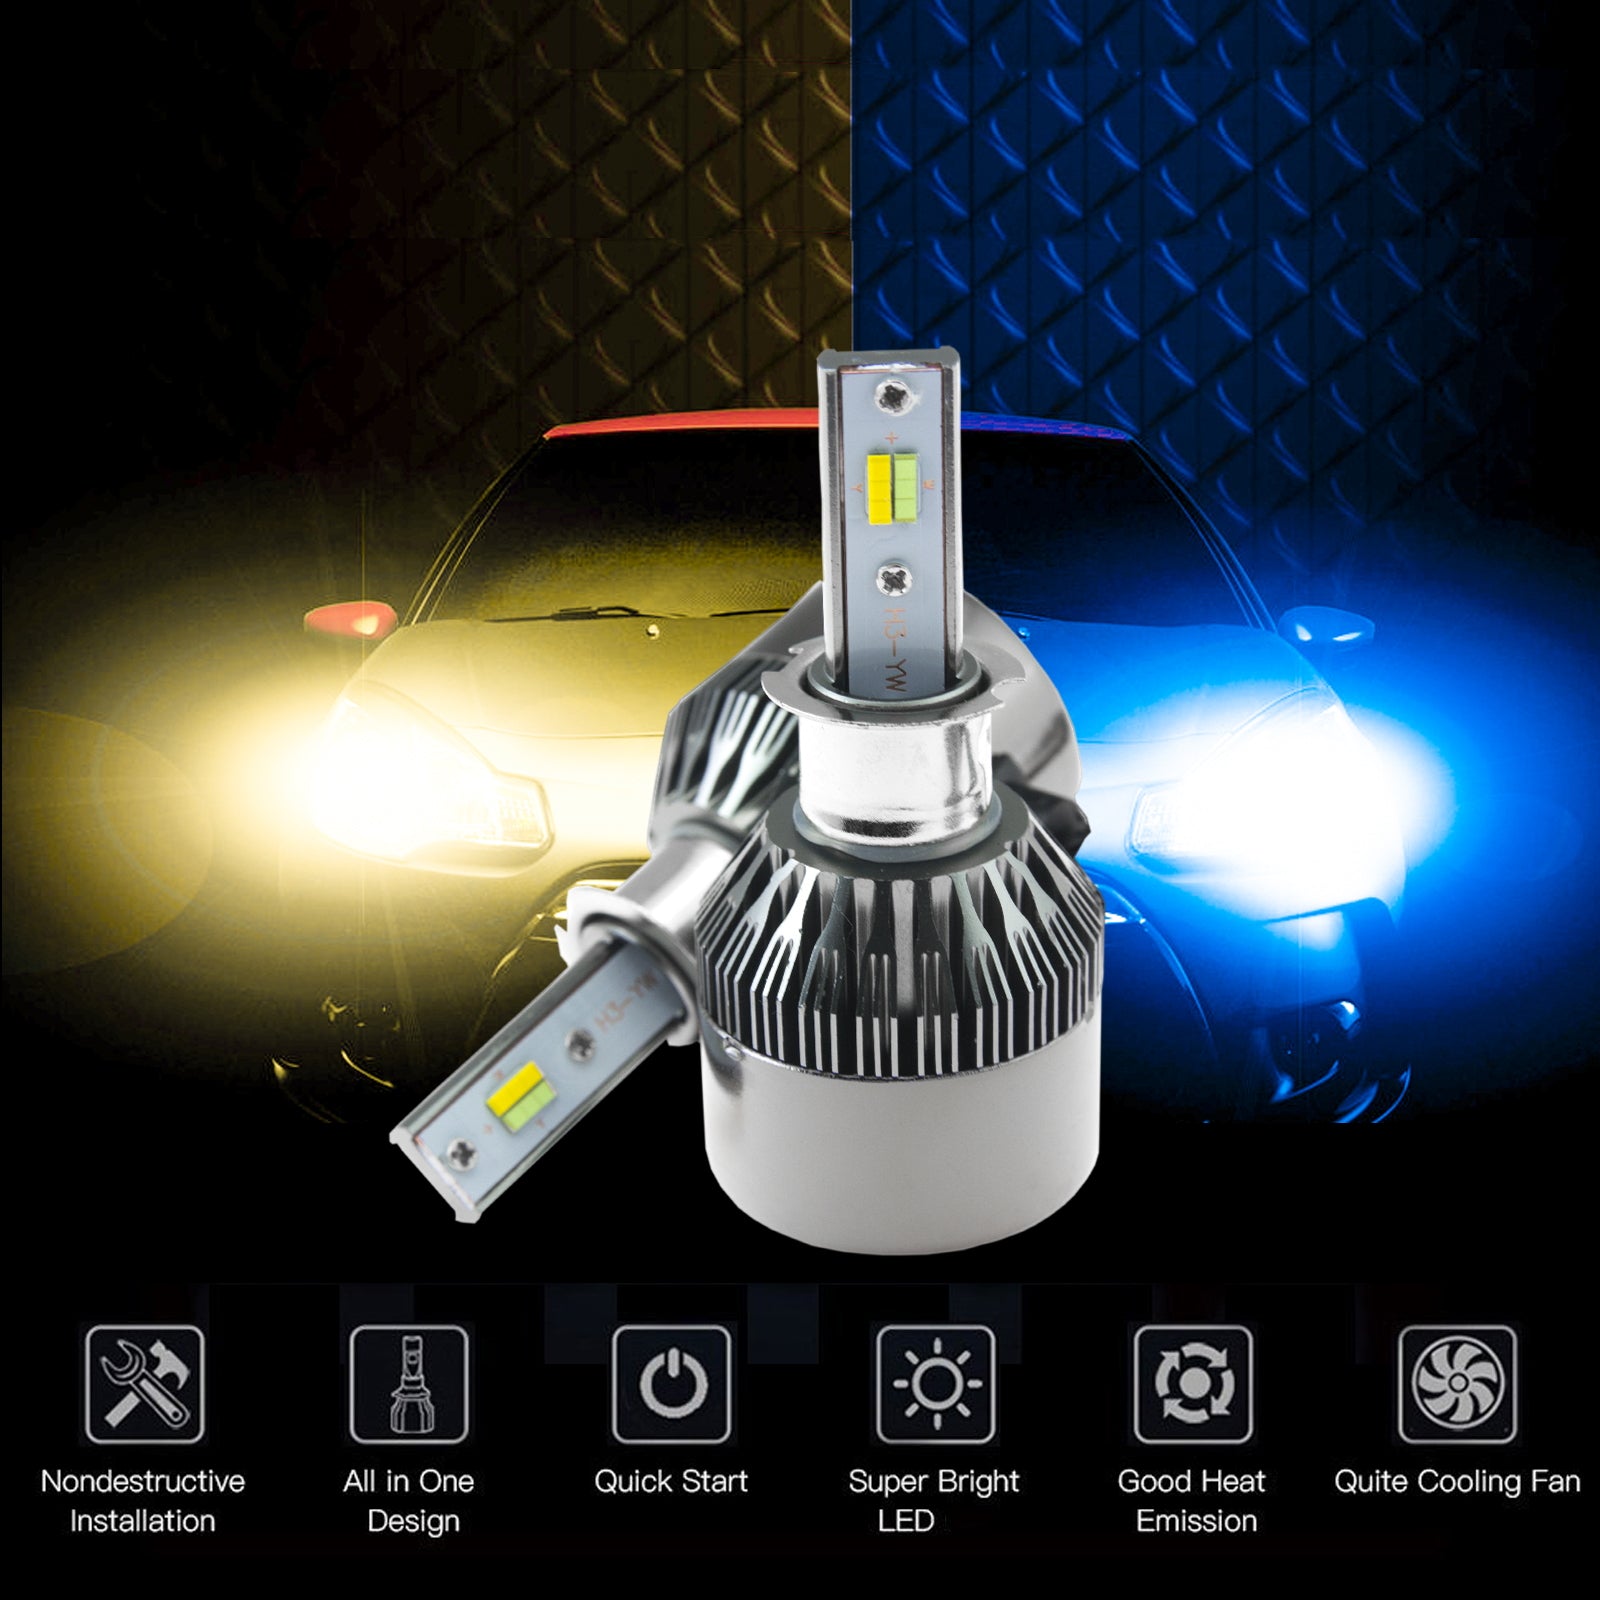 H3 8000LM Dual-Color 3000K Amber\8000K Ice Blue LED Headlight Low